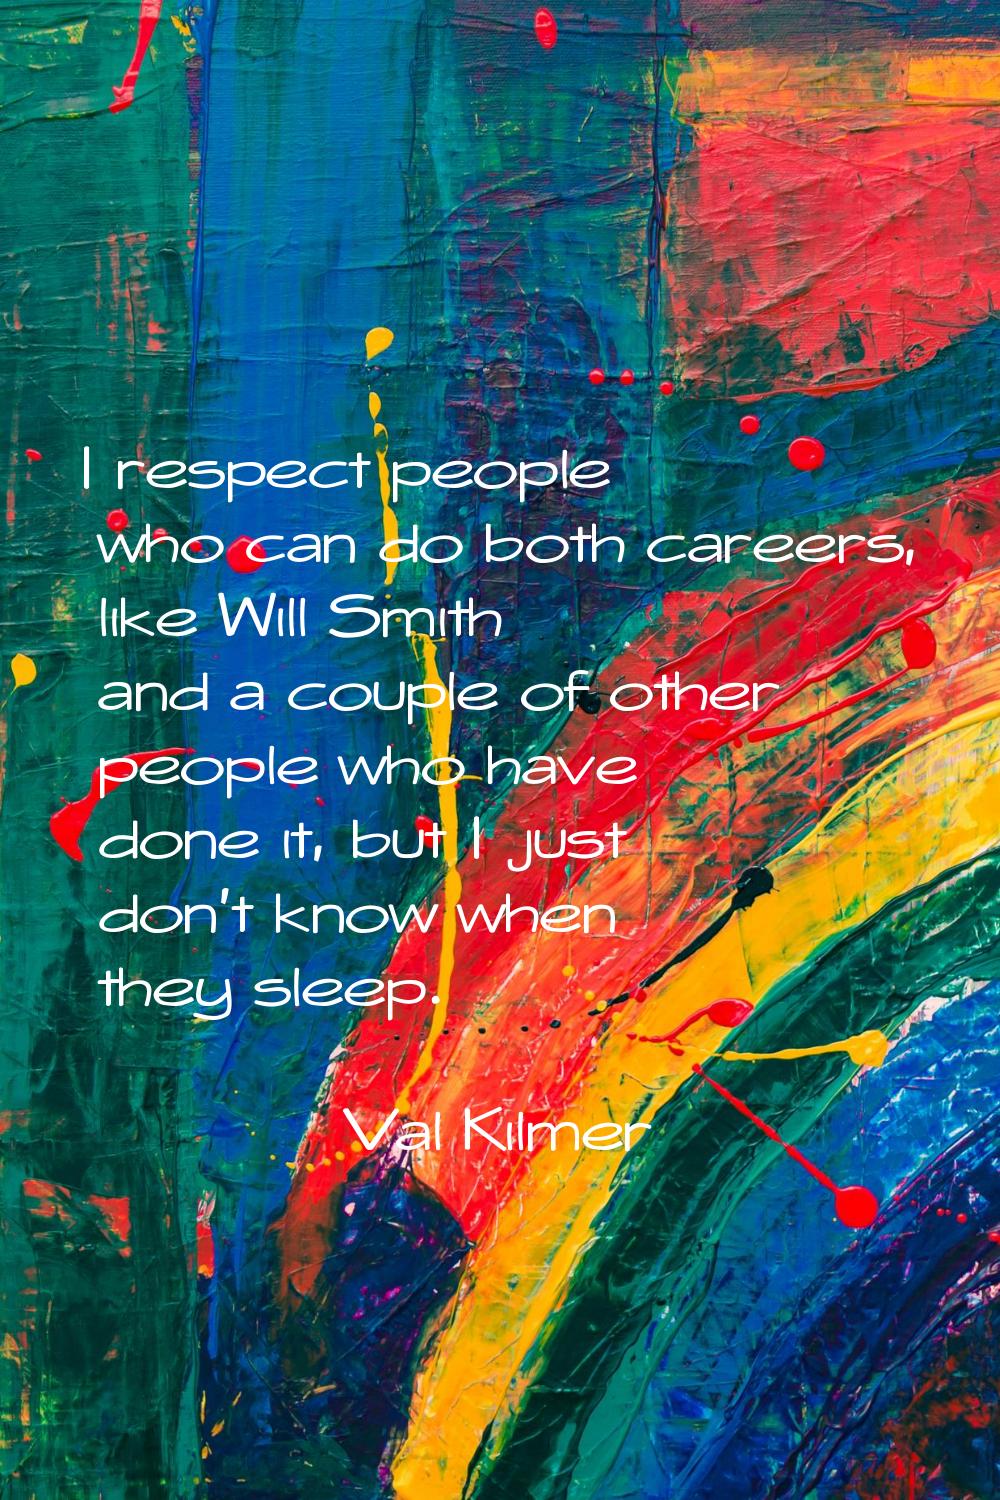 I respect people who can do both careers, like Will Smith and a couple of other people who have don